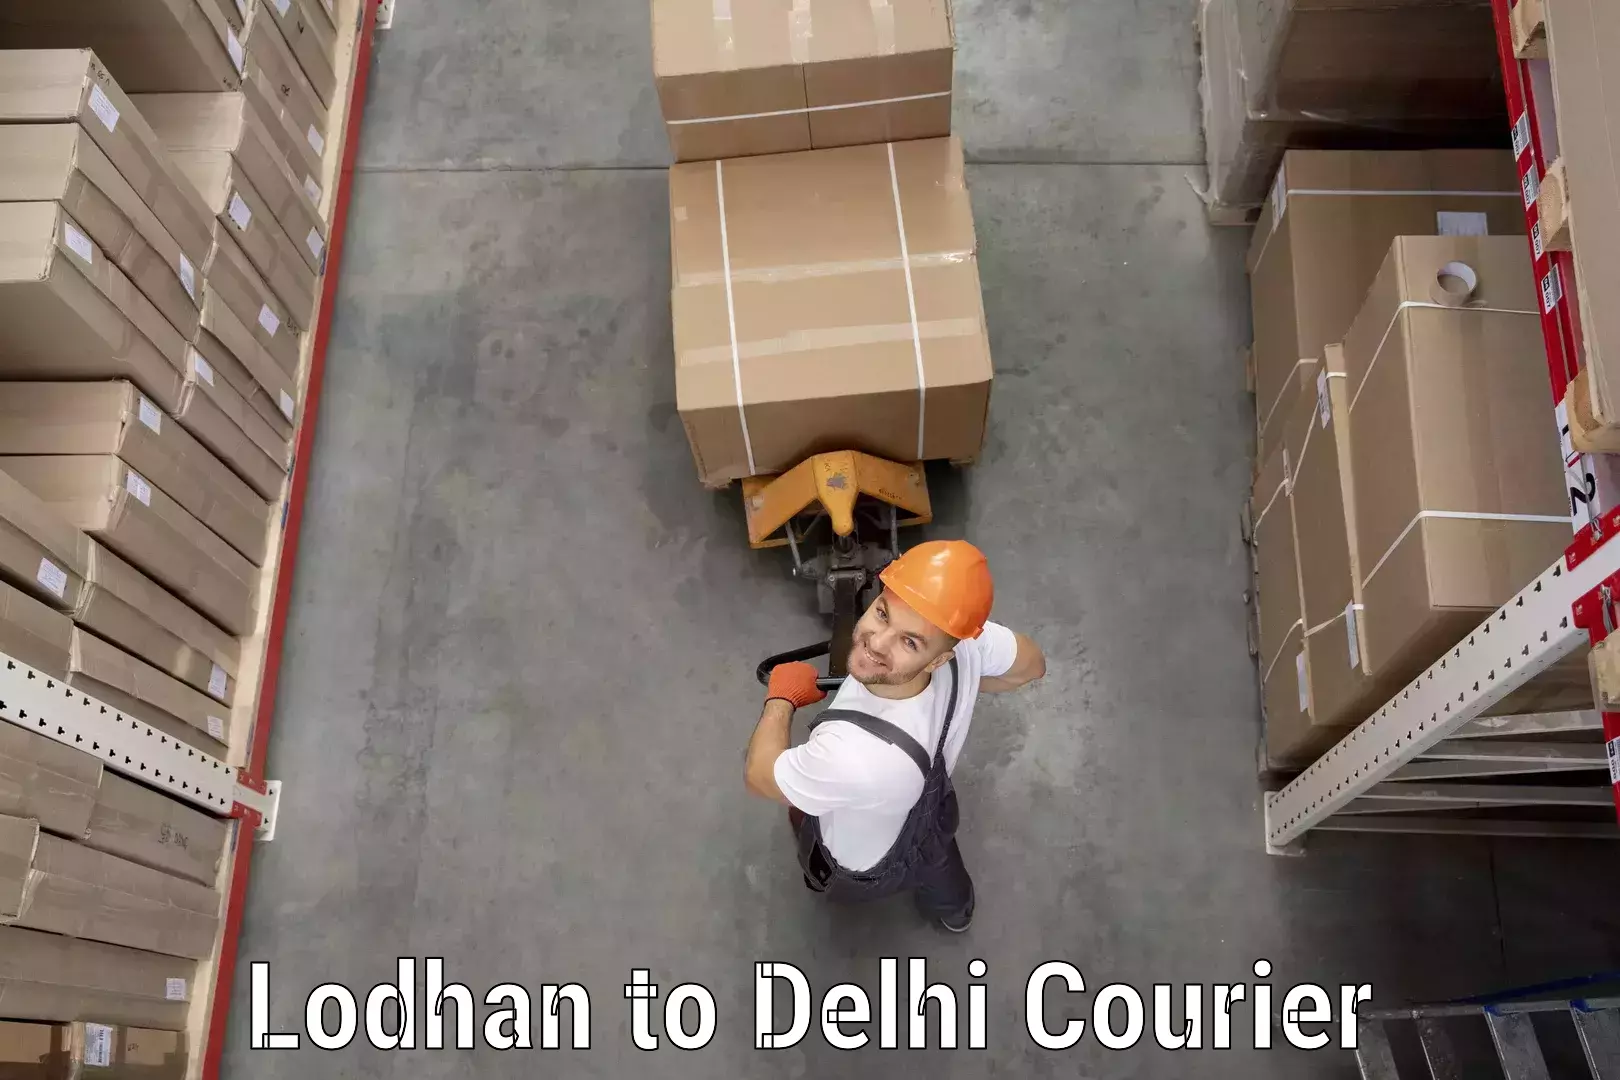 State-of-the-art courier technology Lodhan to University of Delhi